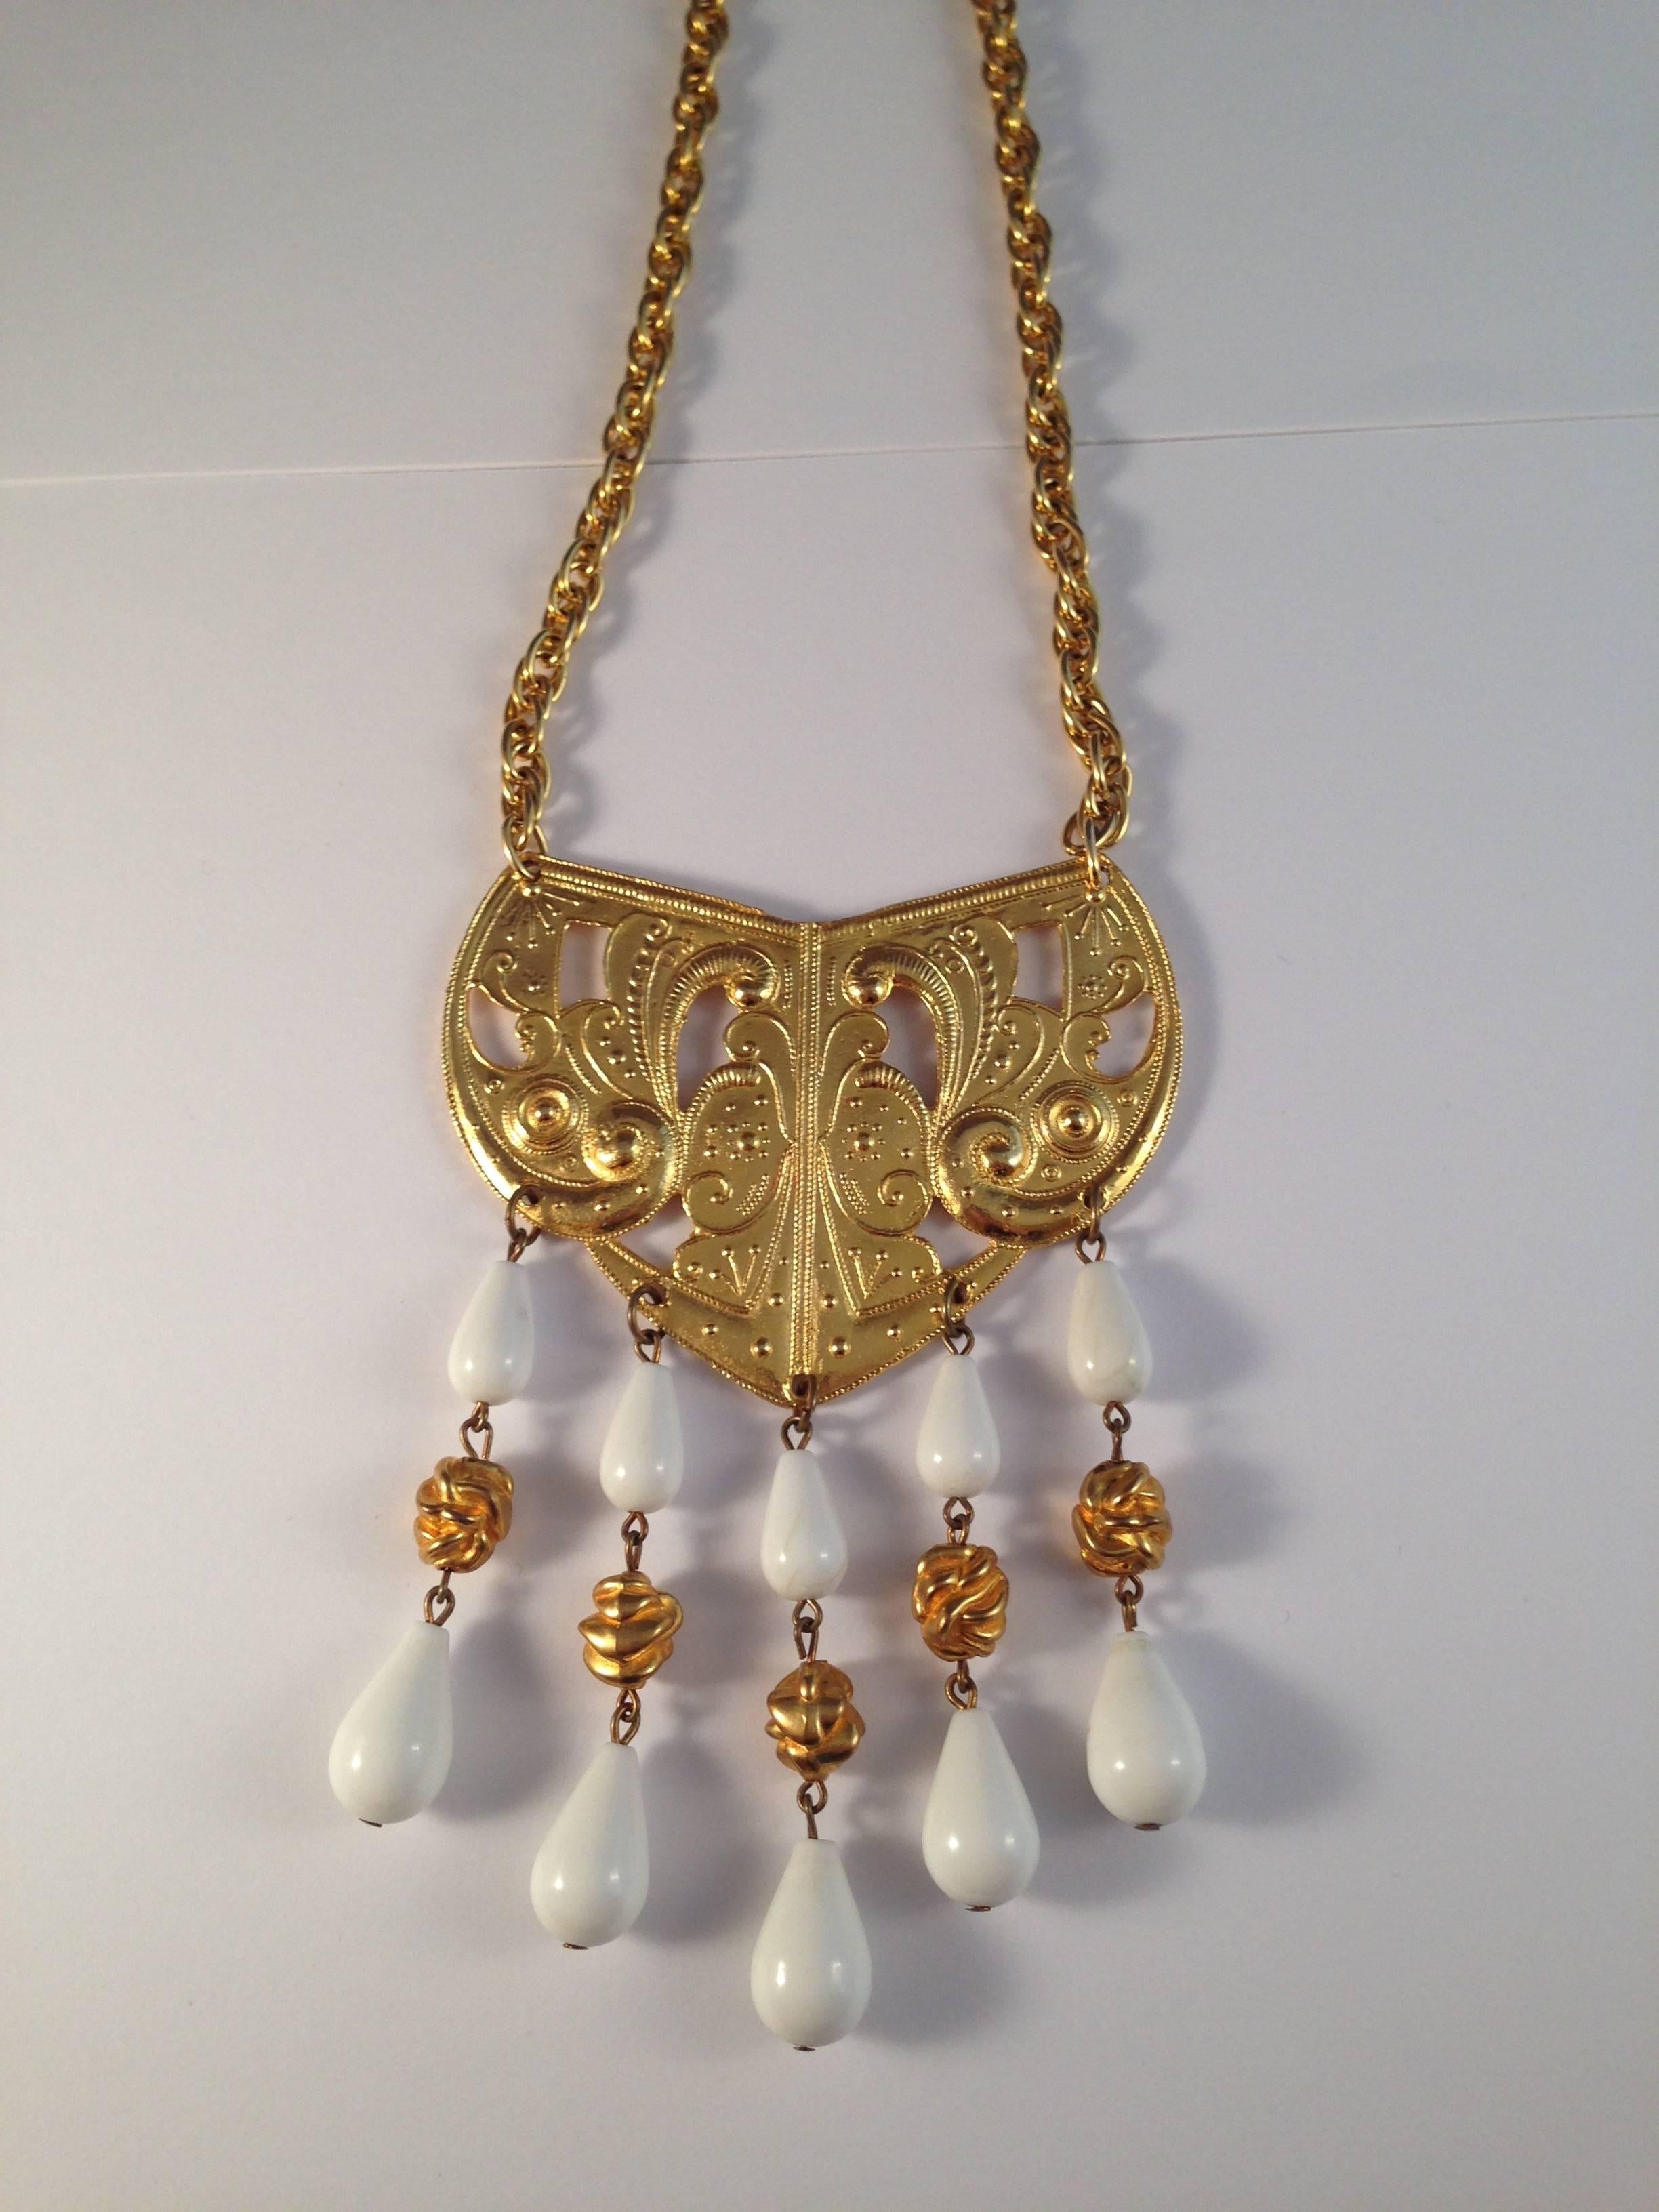 1970s Kenneth Jay Lane Gold Tone and White Pendant Necklace In Excellent Condition For Sale In Chicago, IL